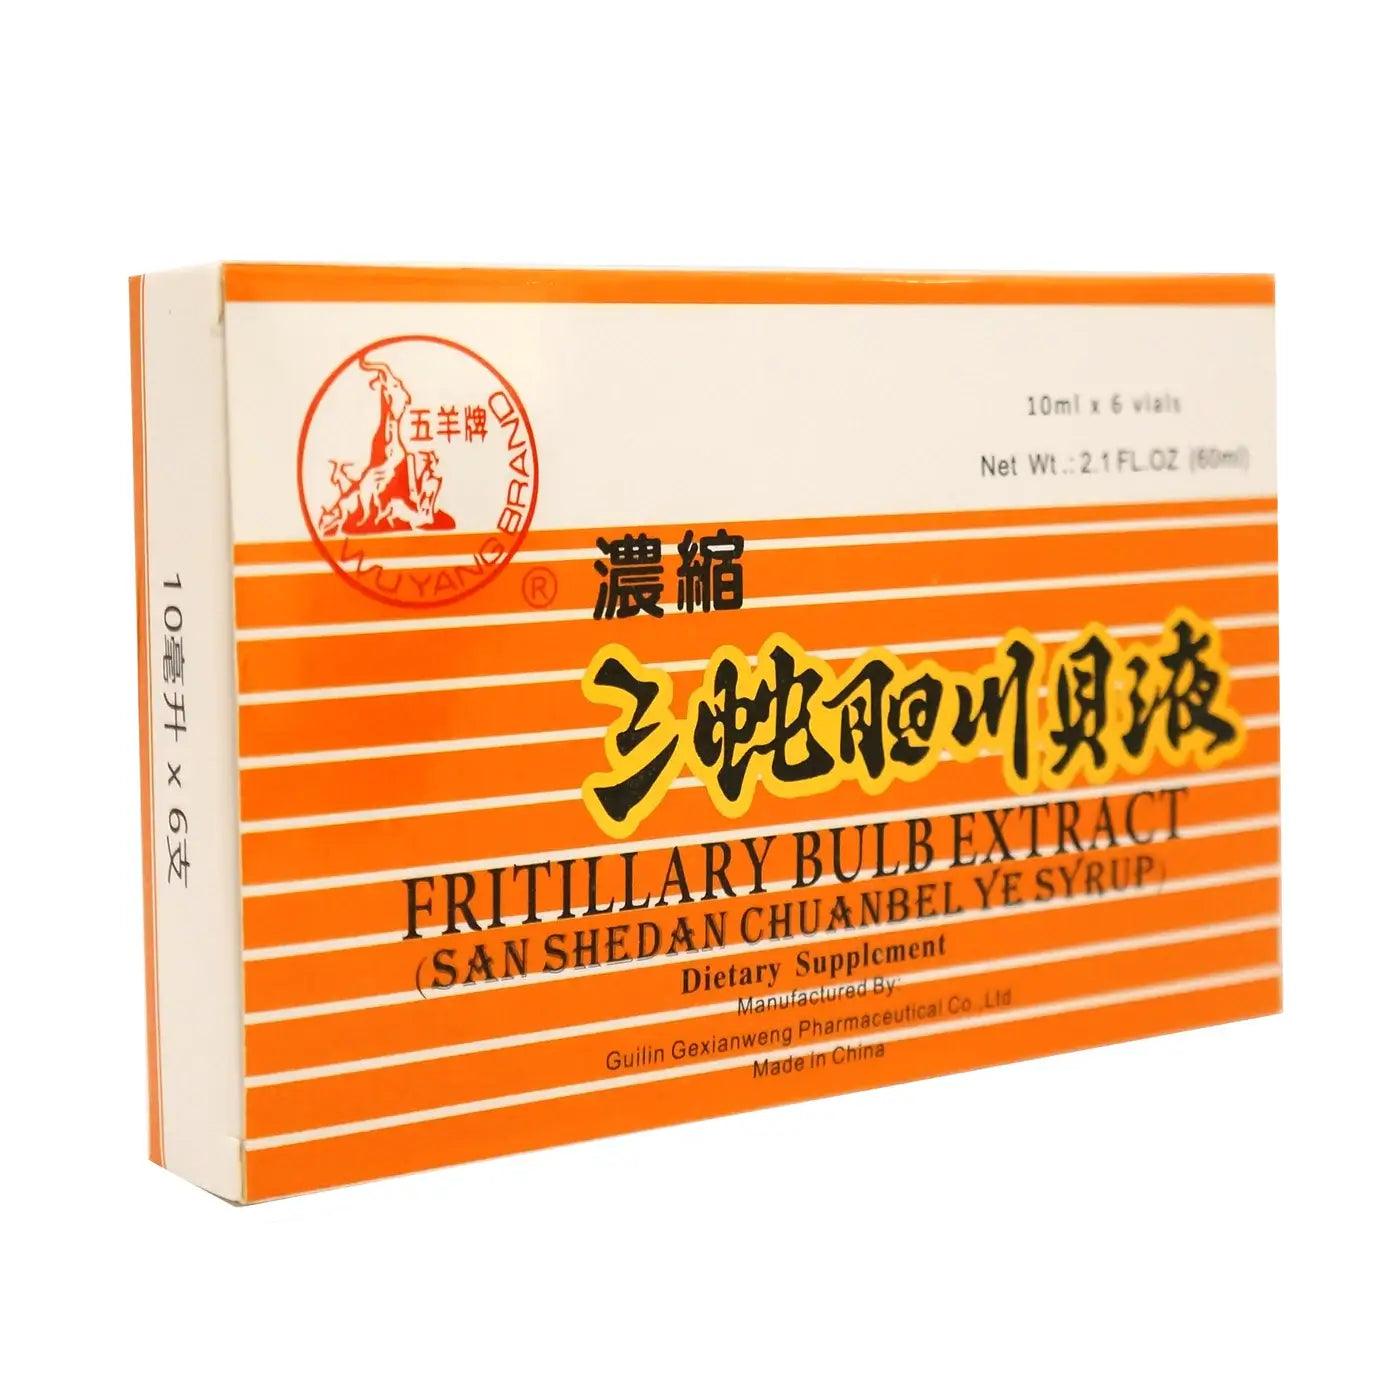 4 Boxes of Fritillary Bulb Extract (Sweet) Oral Liquid (Shedan Chuanbei Ye Syrup) 6 Vials - Buy at New Green Nutrition